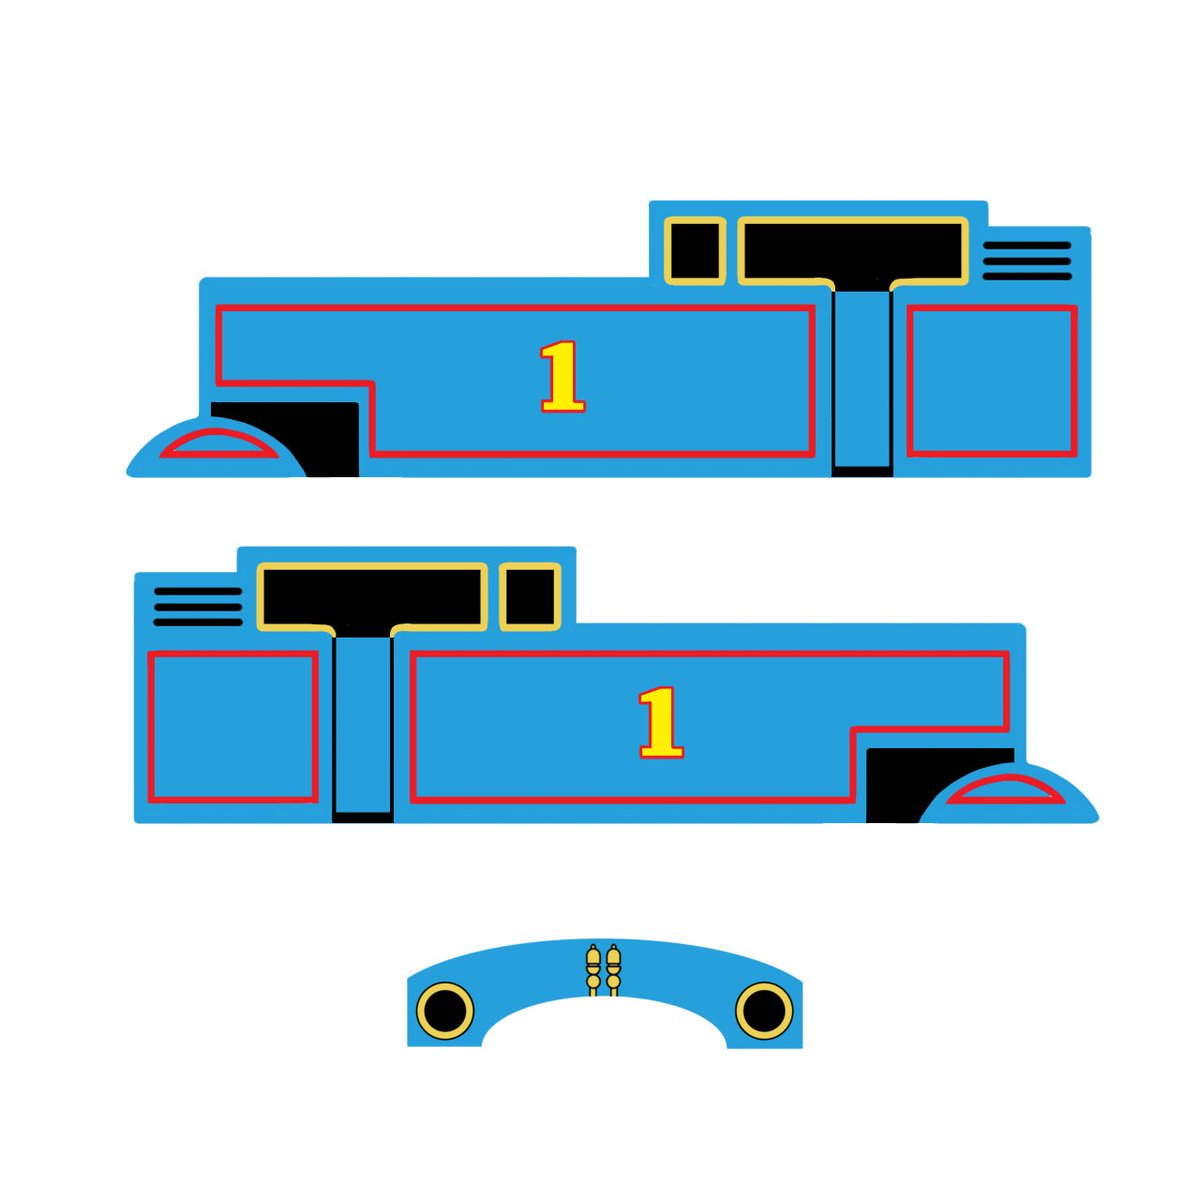 thomas trackmaster 2 decals pack?? 🙀‼️

more decals: drive.google.com/drive/folders/…